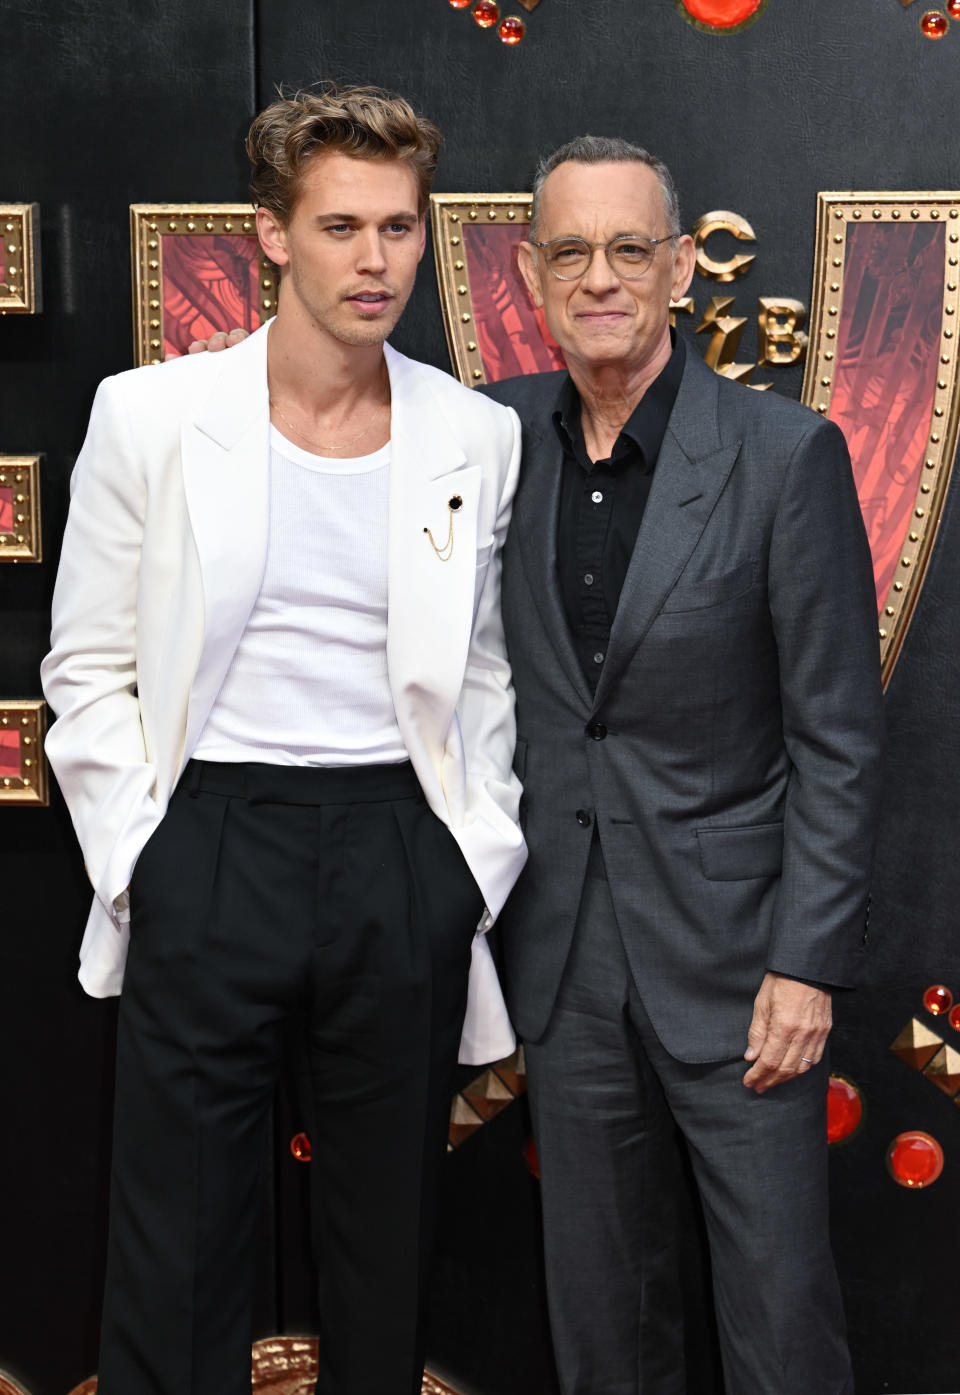 Closeup of Austin Butler and Tom Hanks smile for a photo together at a media event